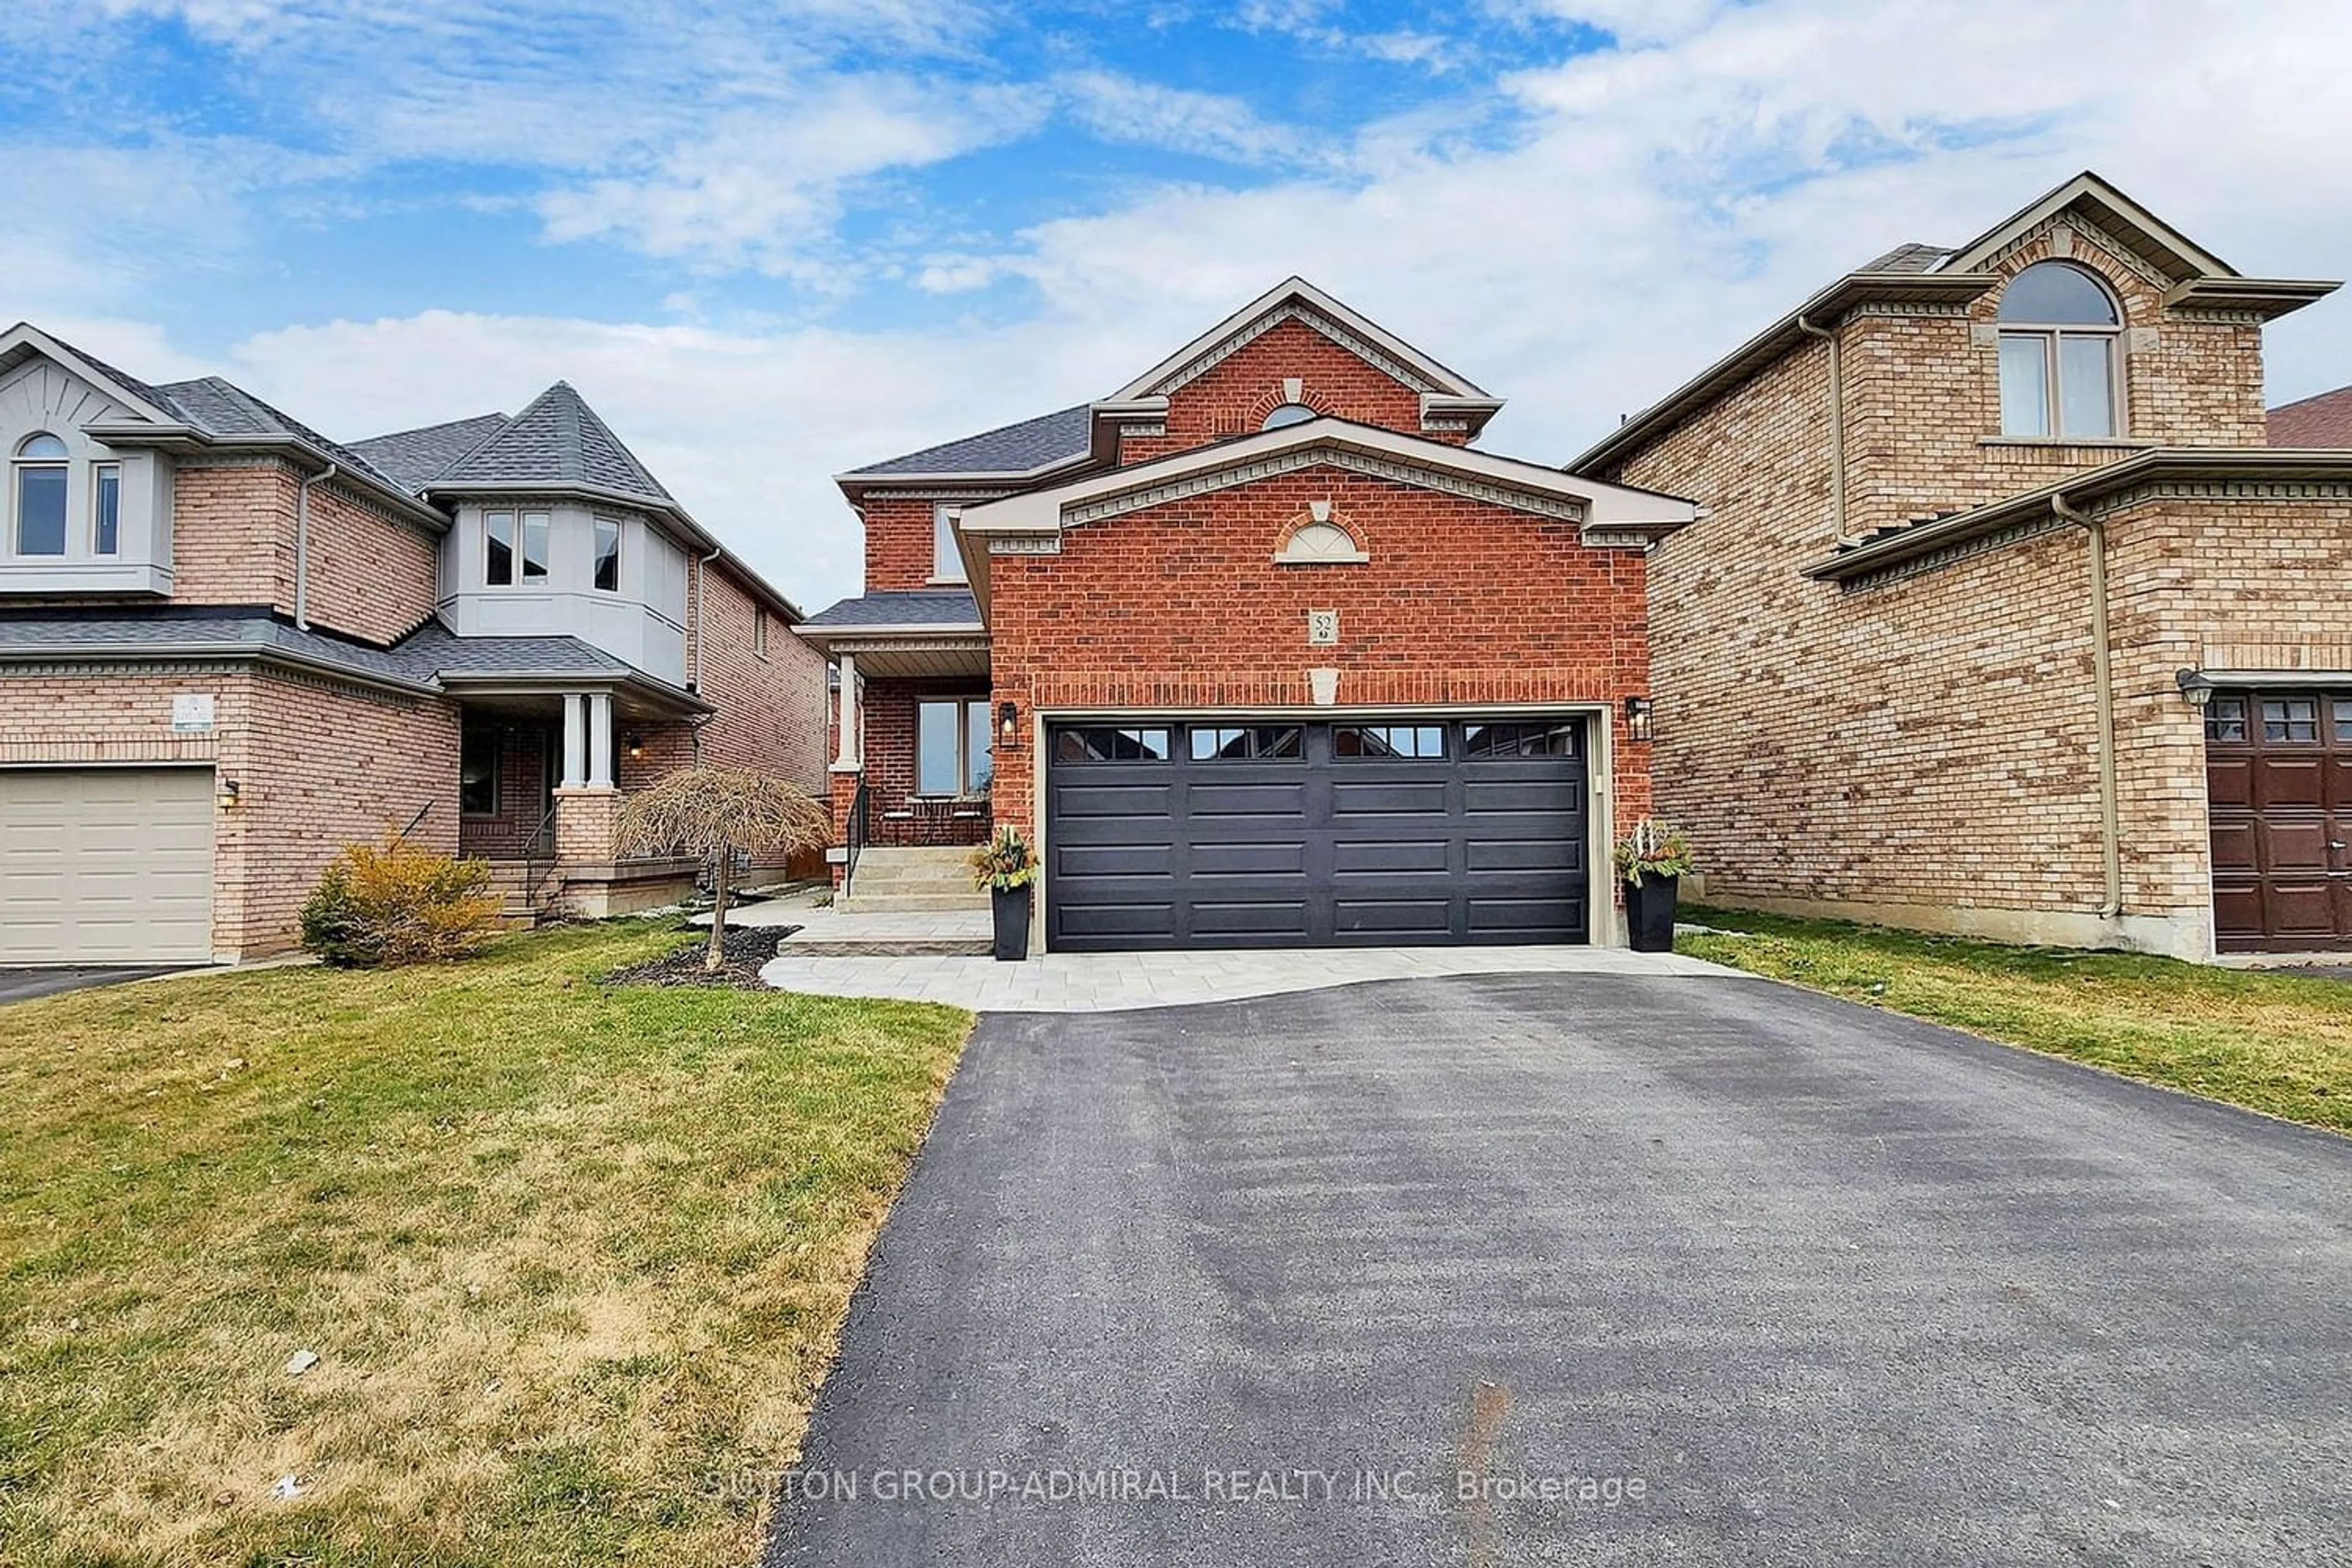 Home with brick exterior material for 52 Mirando St, Richmond Hill Ontario L4S 2W6